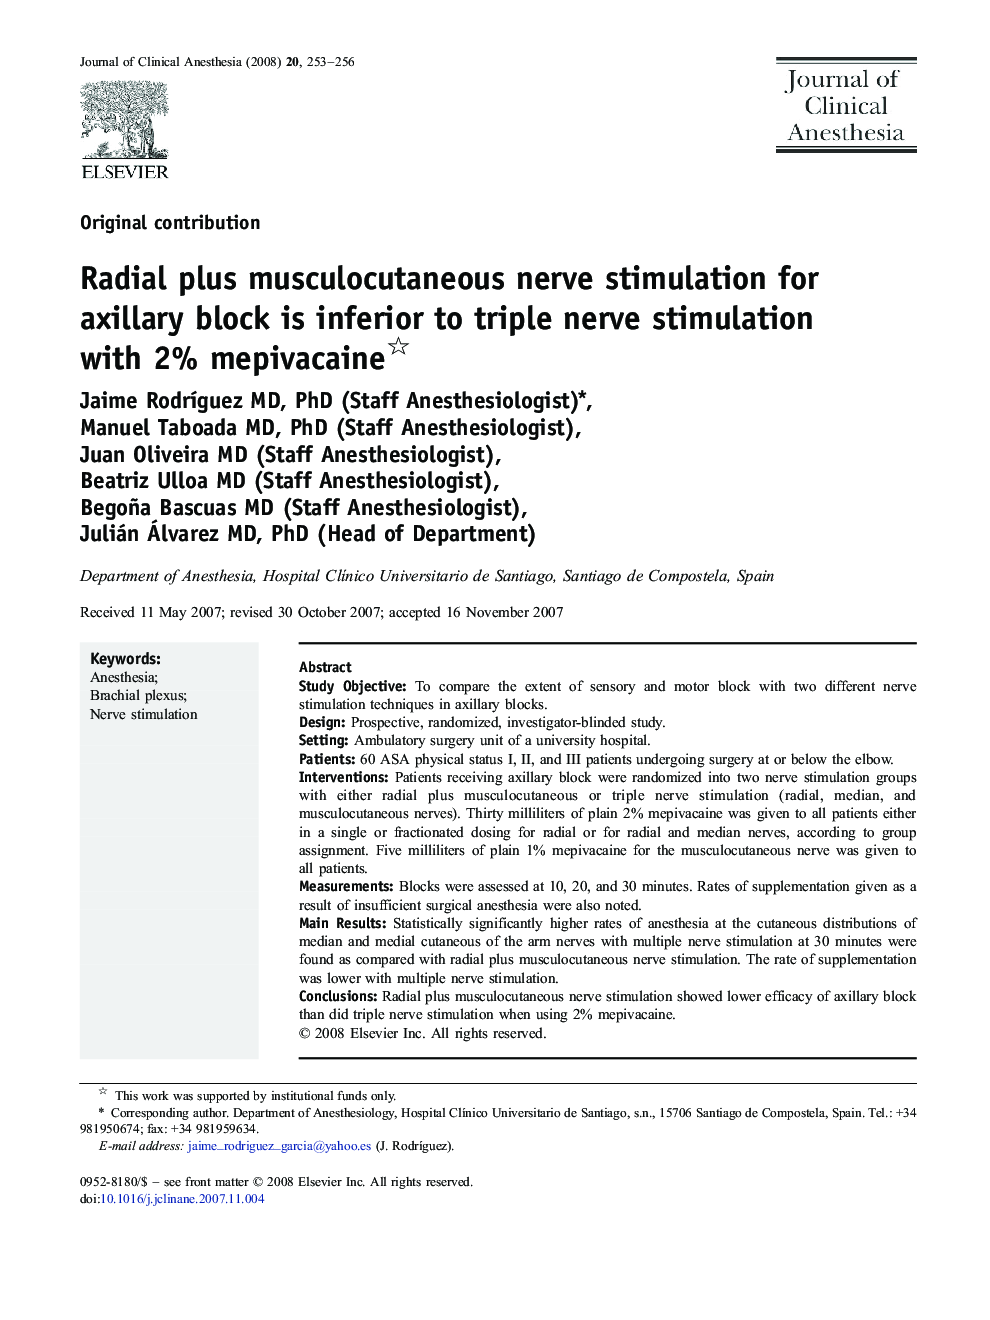 Radial plus musculocutaneous nerve stimulation for axillary block is inferior to triple nerve stimulation with 2% mepivacaine 